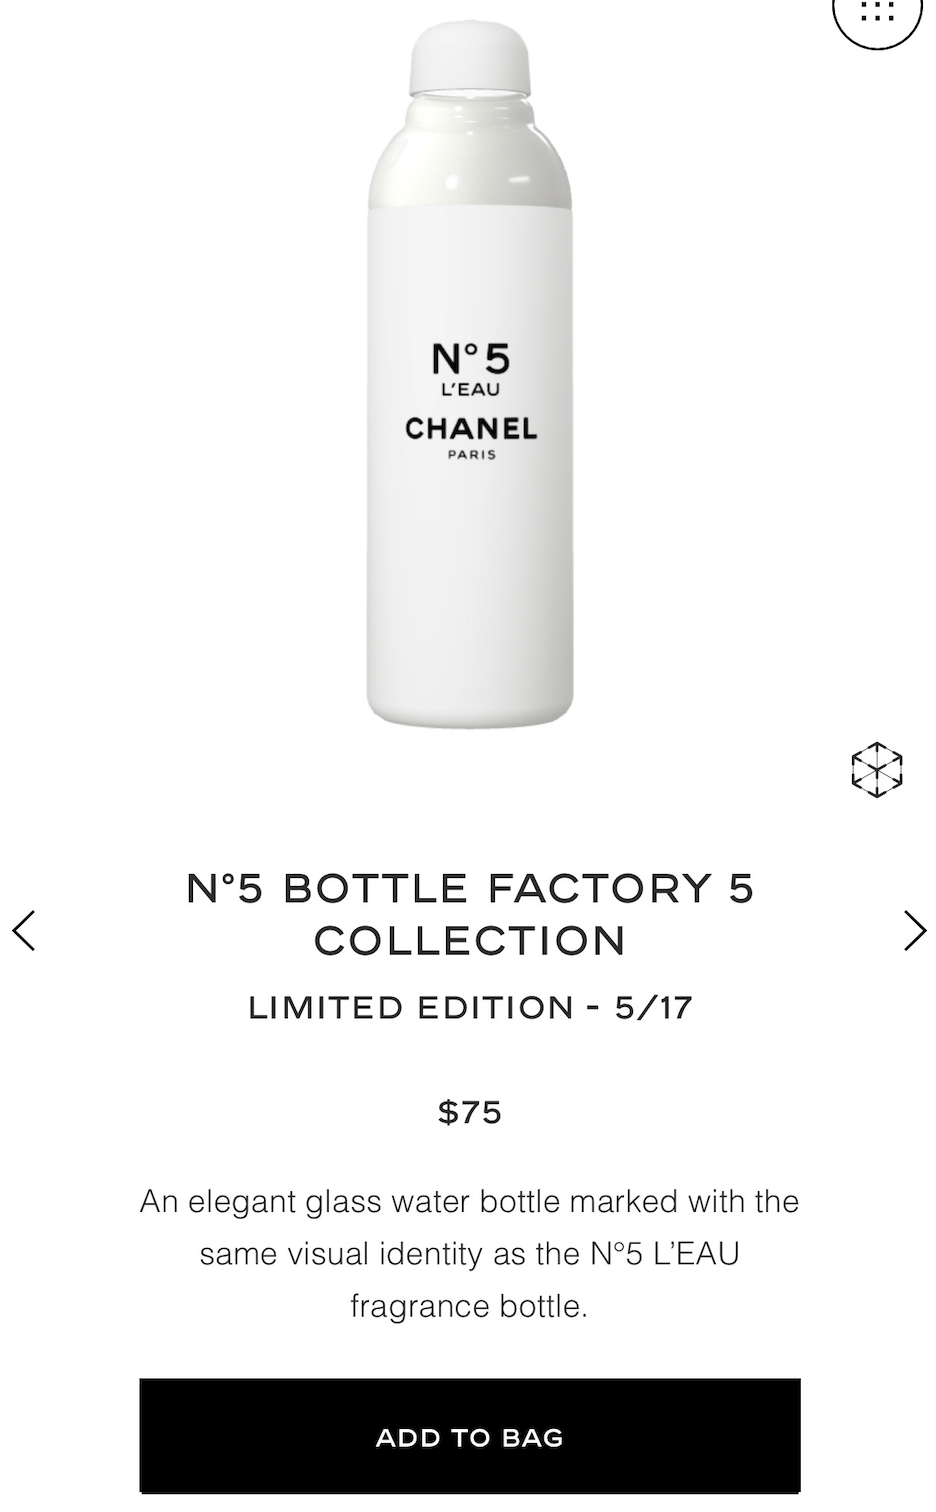 Chanel factory 5 water bottle for sale